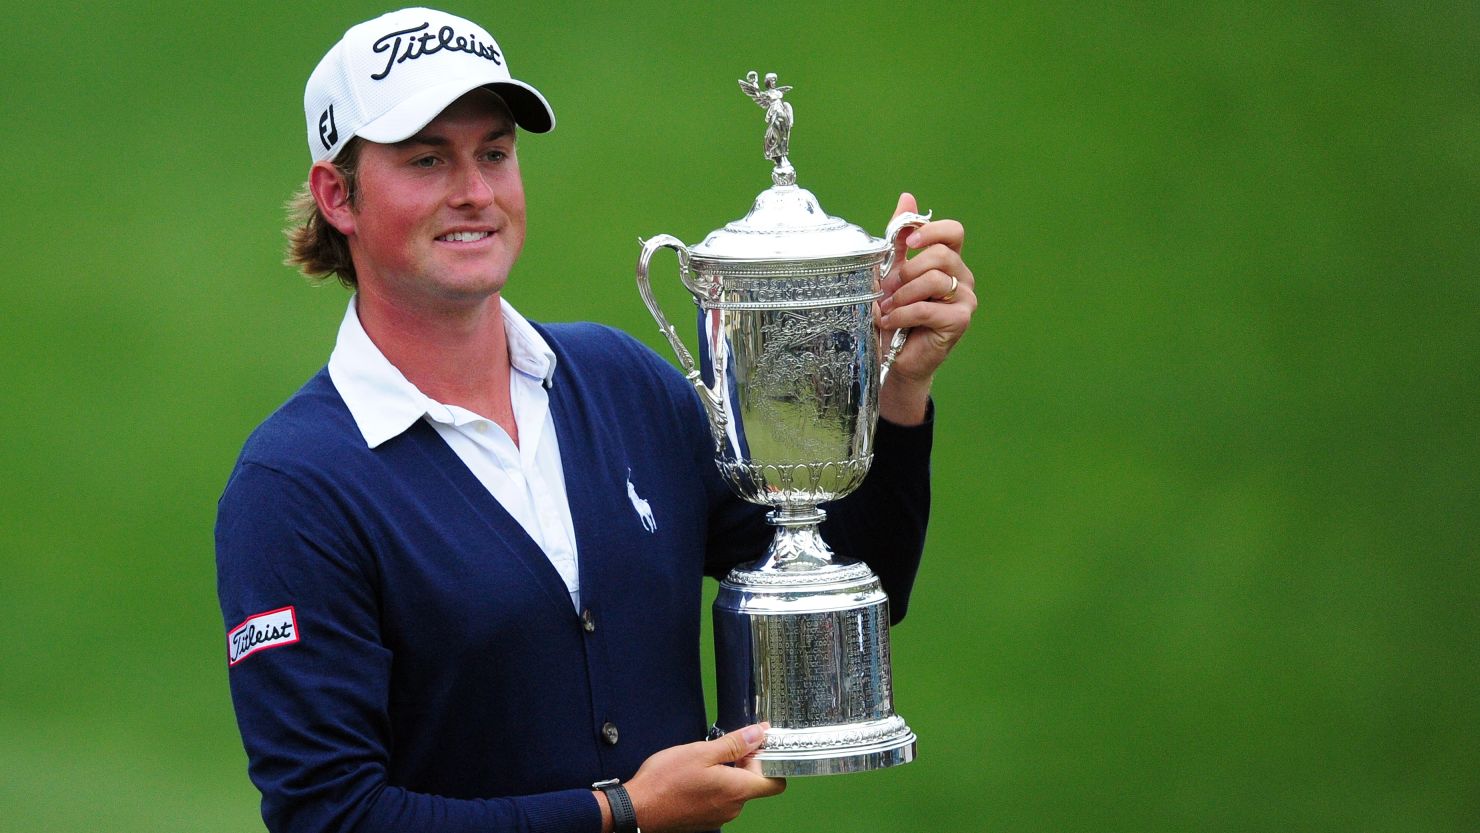 Webb Simpson holds his championship trophy after winning the 112th U.S. Open but will not be at the British Open.